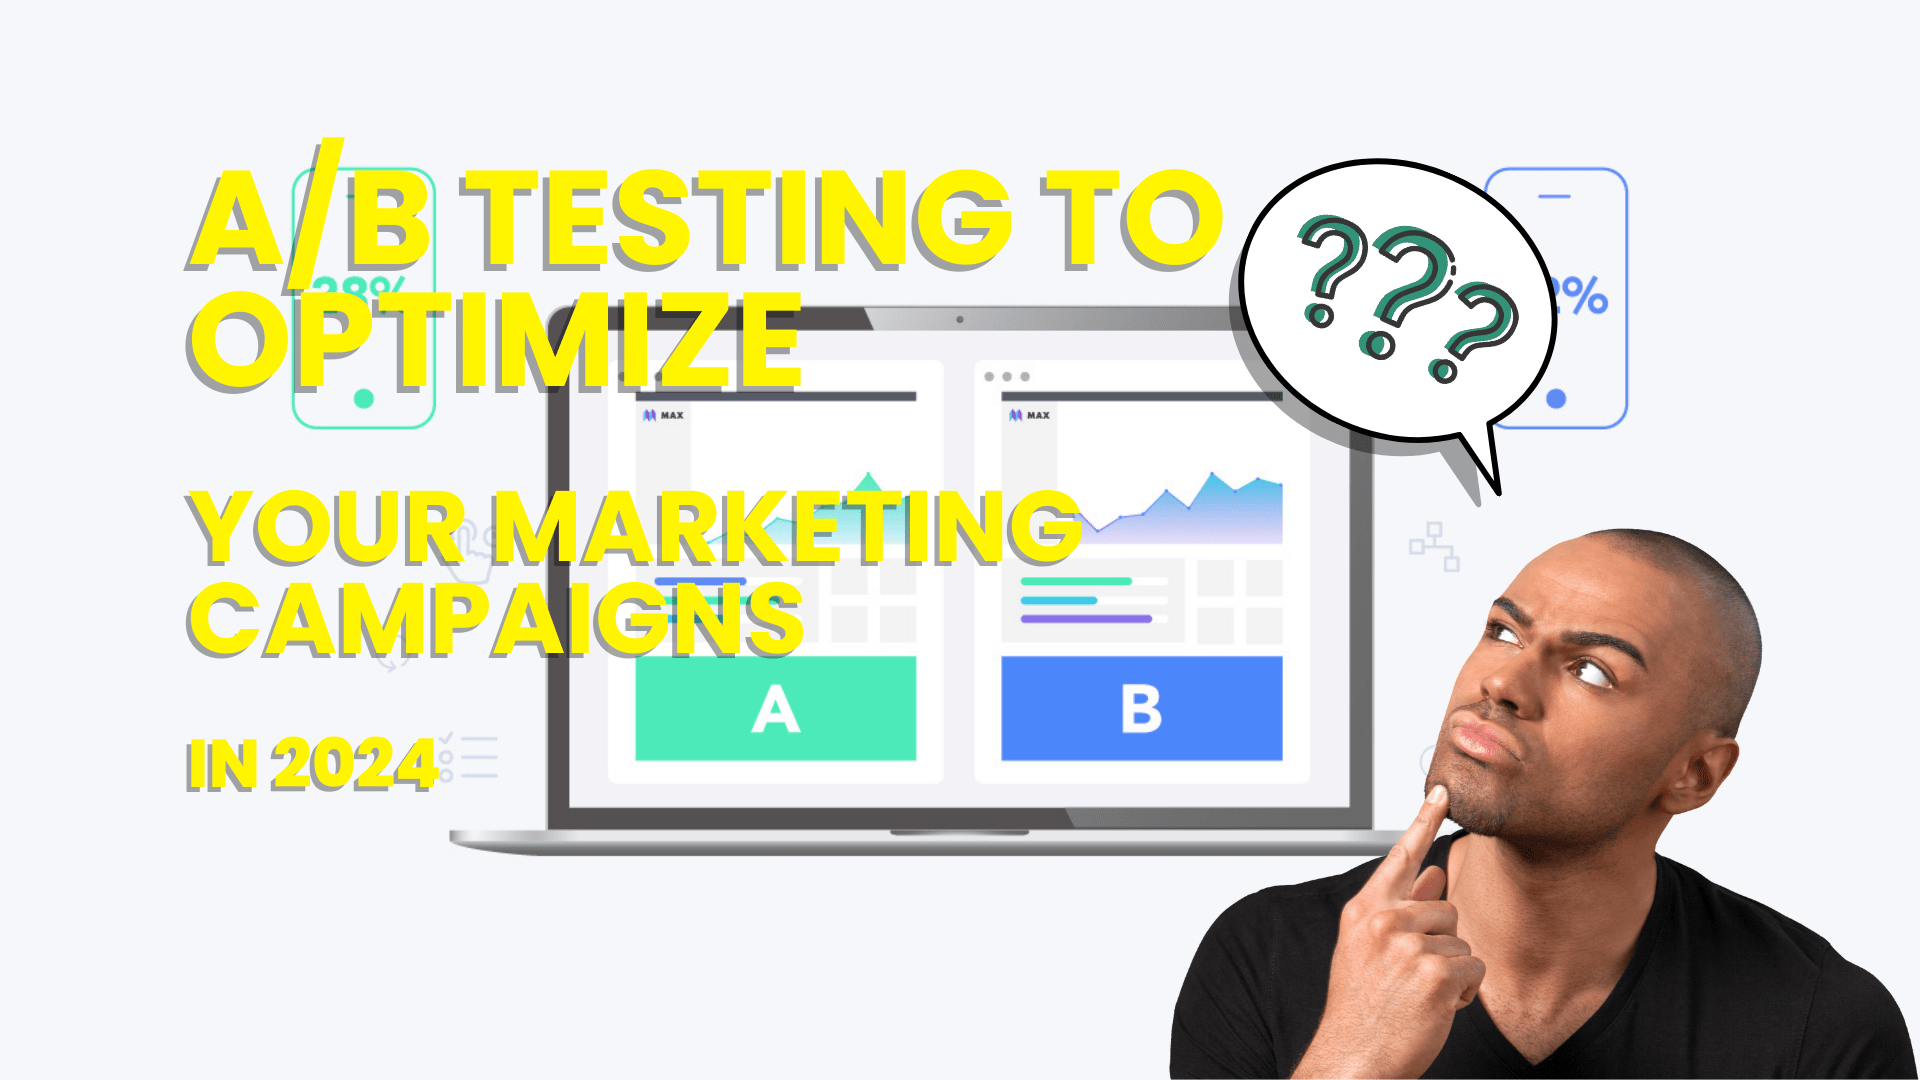 A/B Testing to Optimize Your Marketing Campaigns